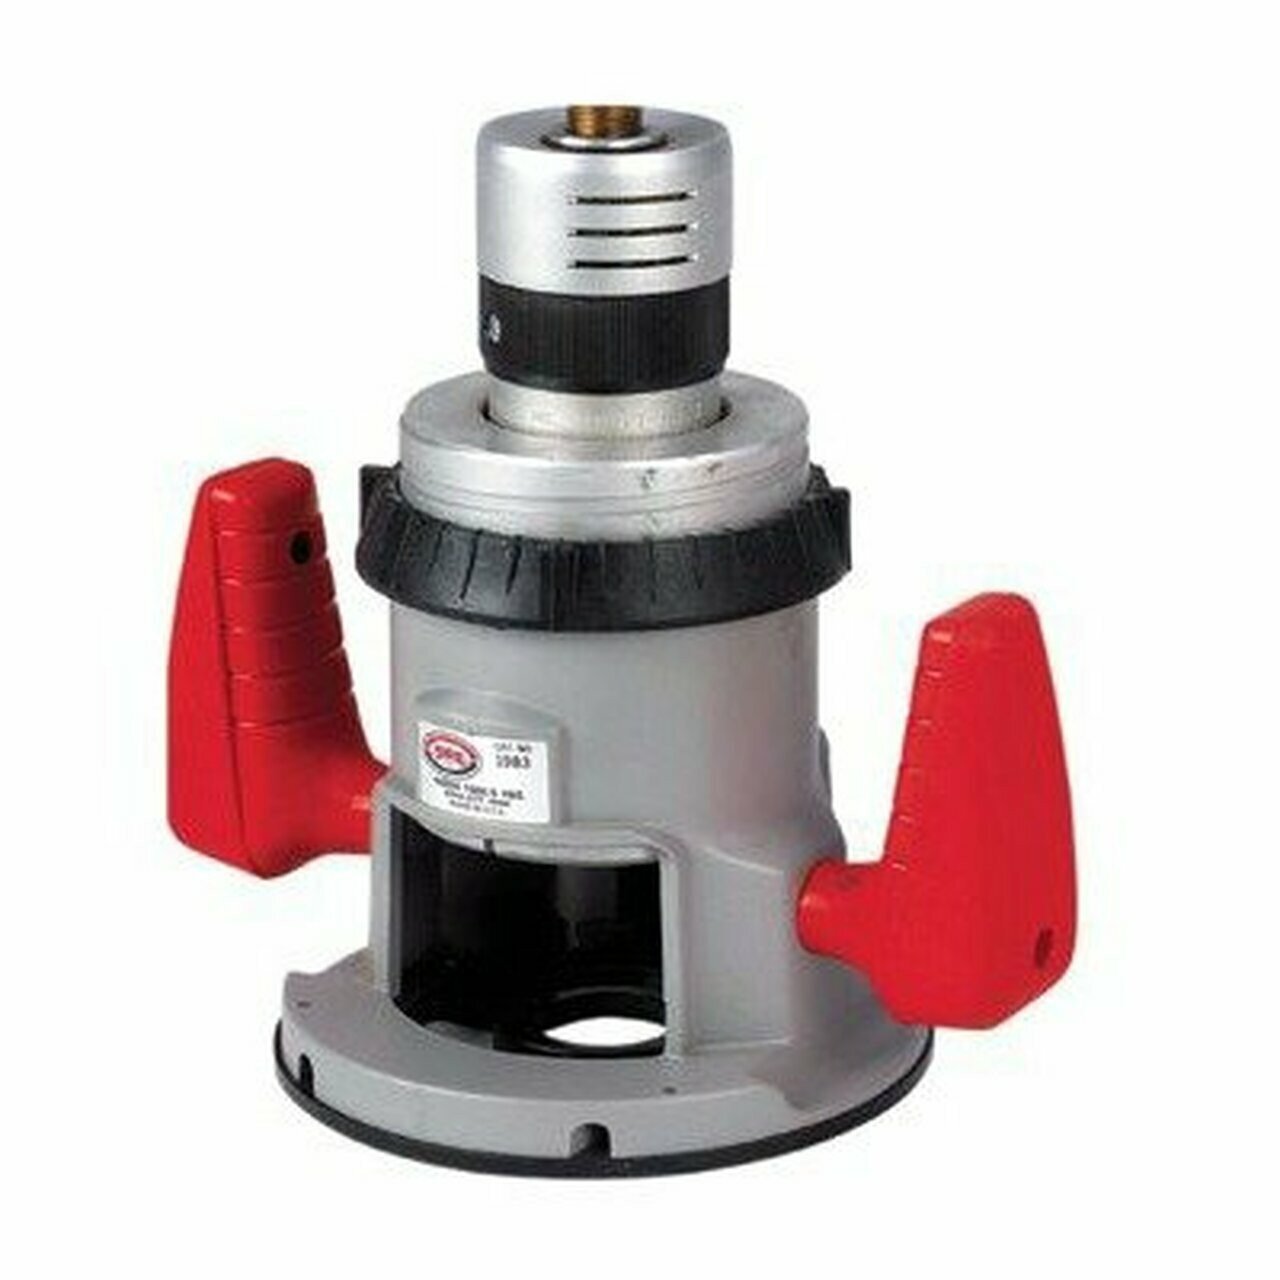 Sioux Tools RT1982 Twist Throttle Router | 1.5 HP | 20,000 RPM